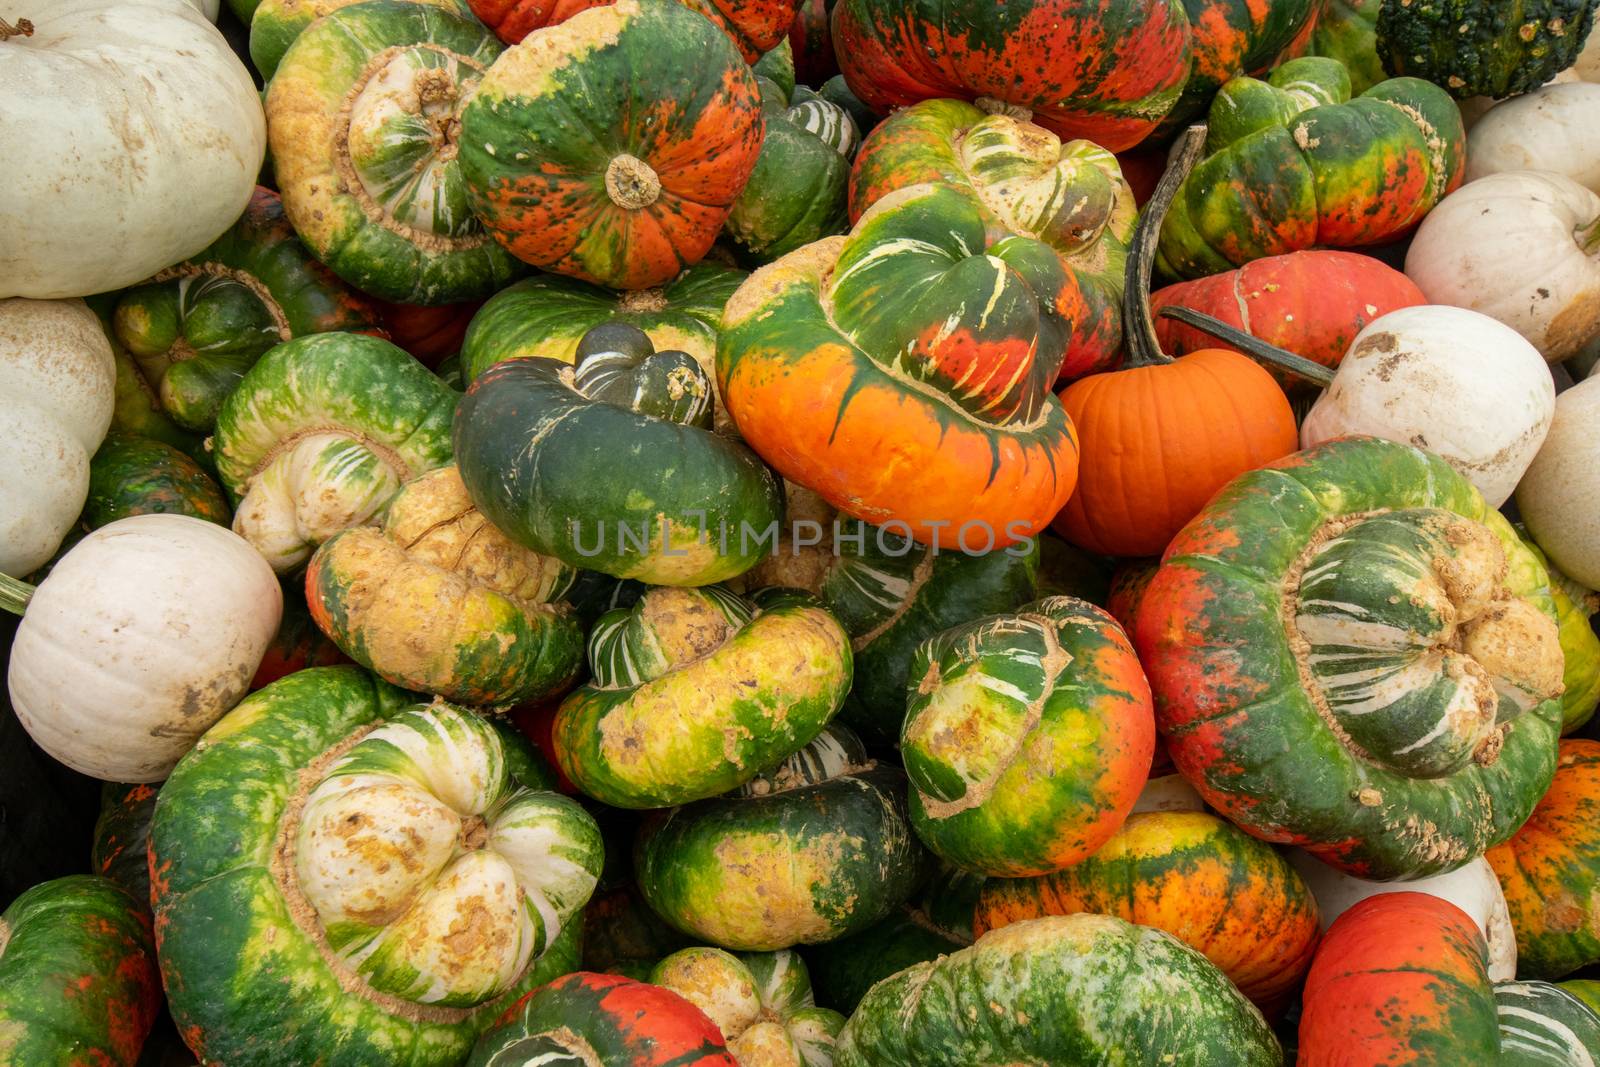 A Pile of Ugly Pumpkins in a Wooden Box at a Farmer's Market Filling the Frame